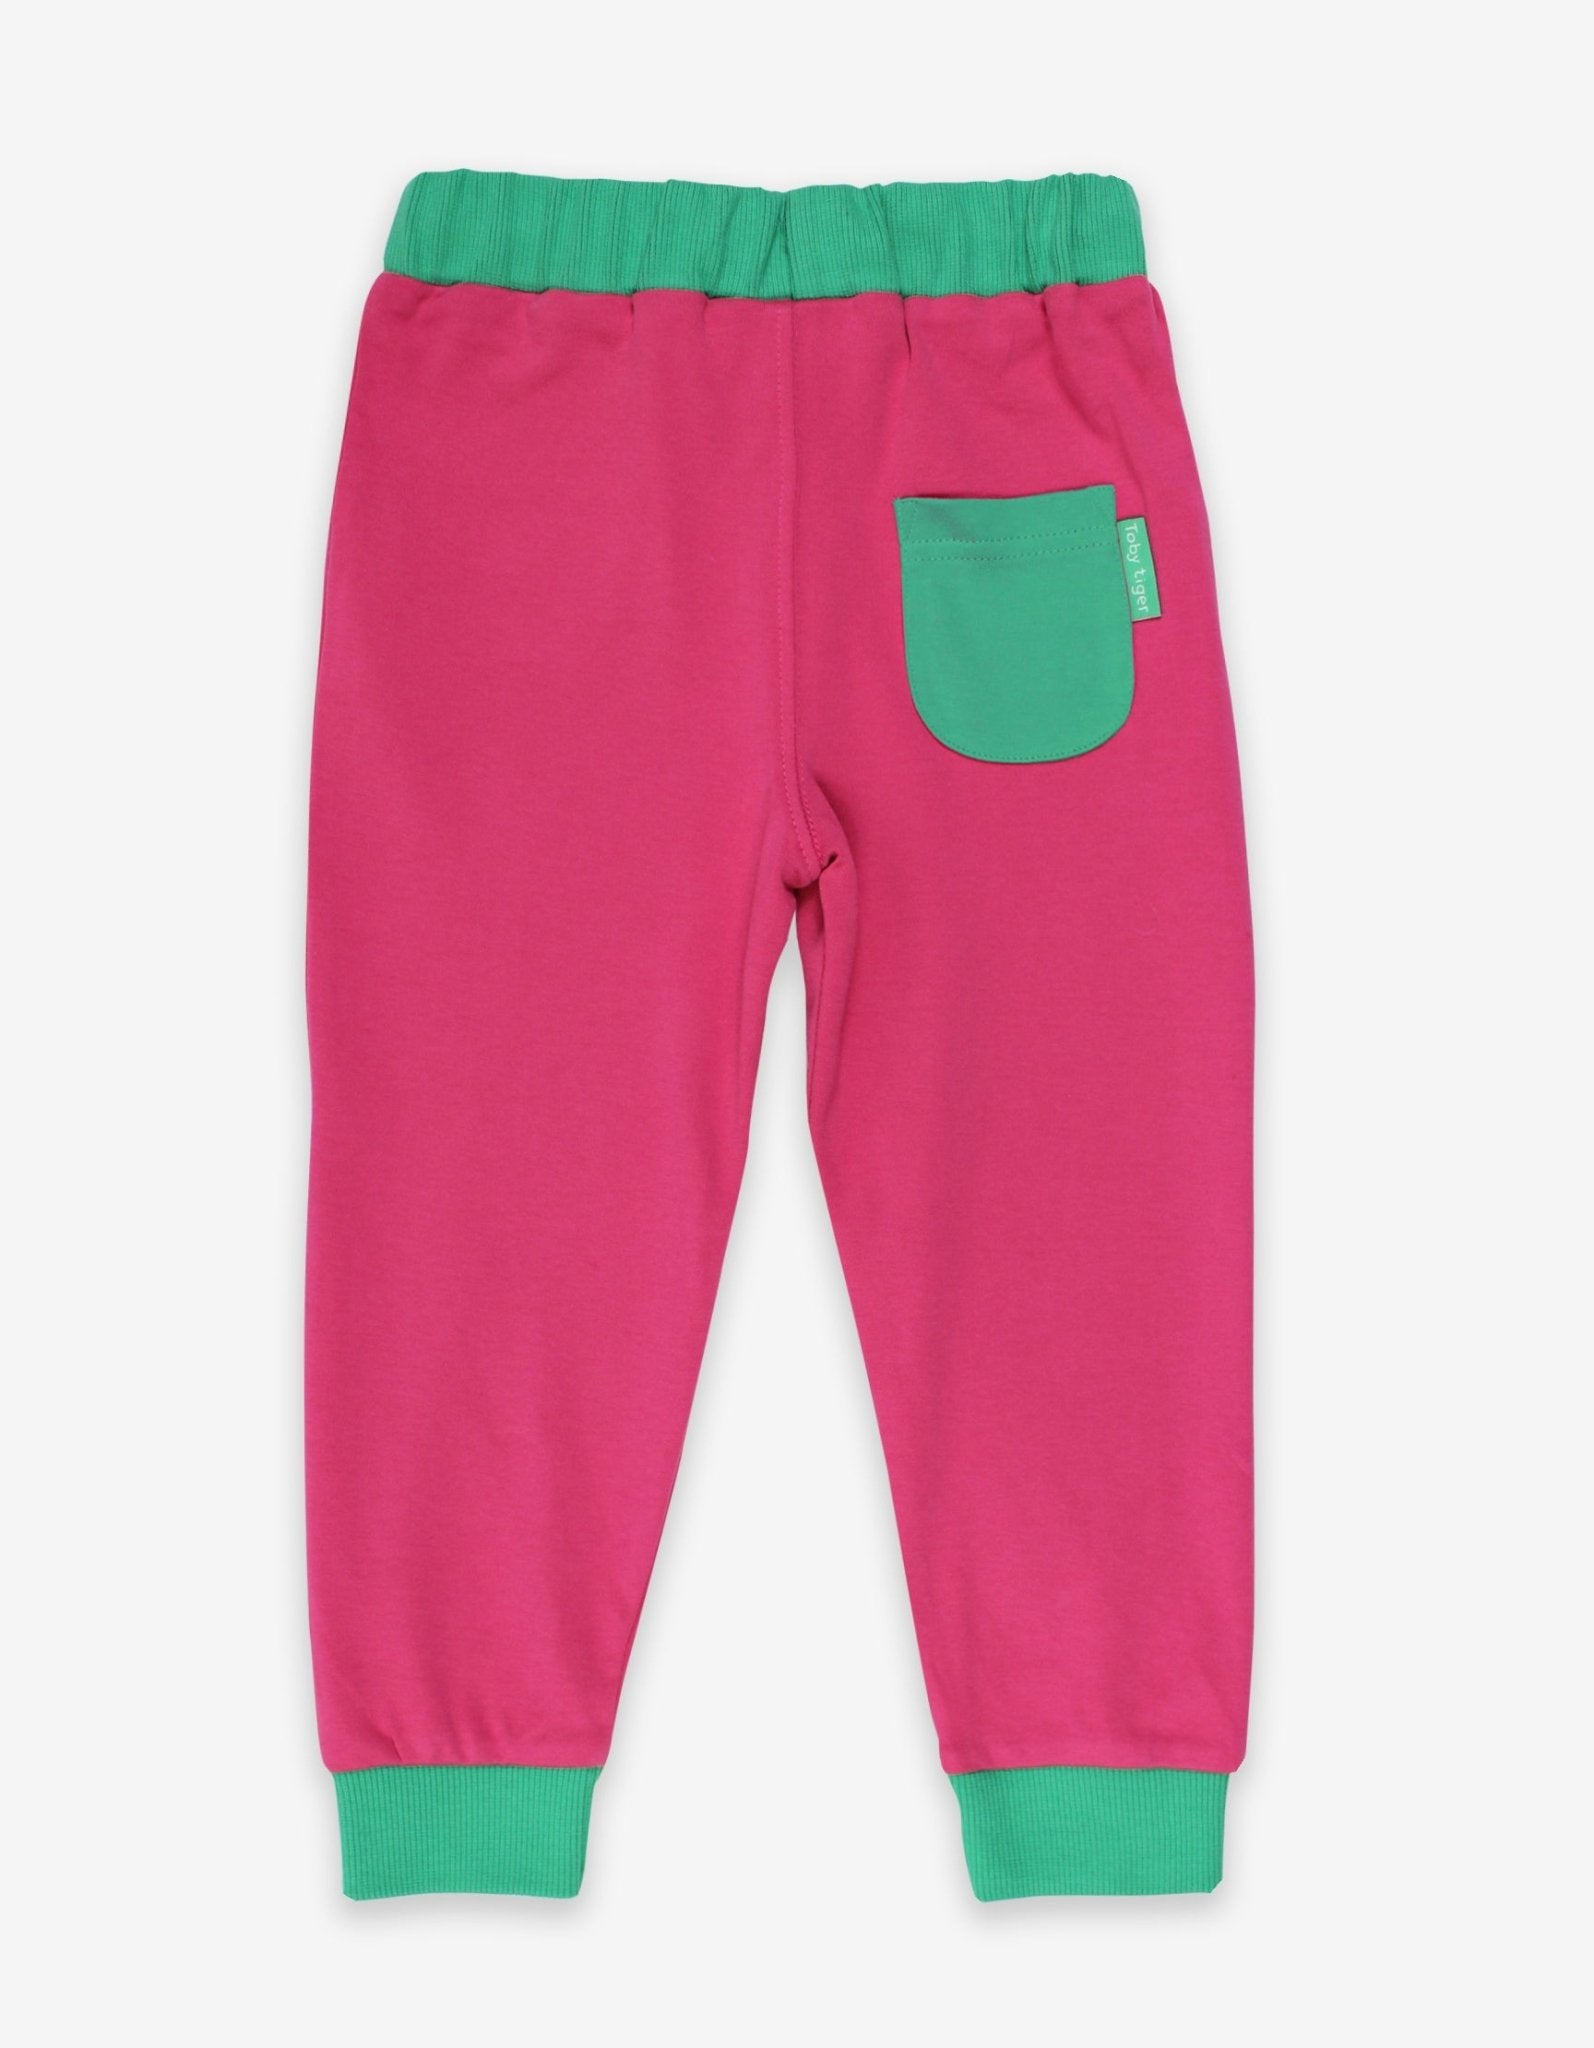 Organic Pink Joggers - Toby Tiger